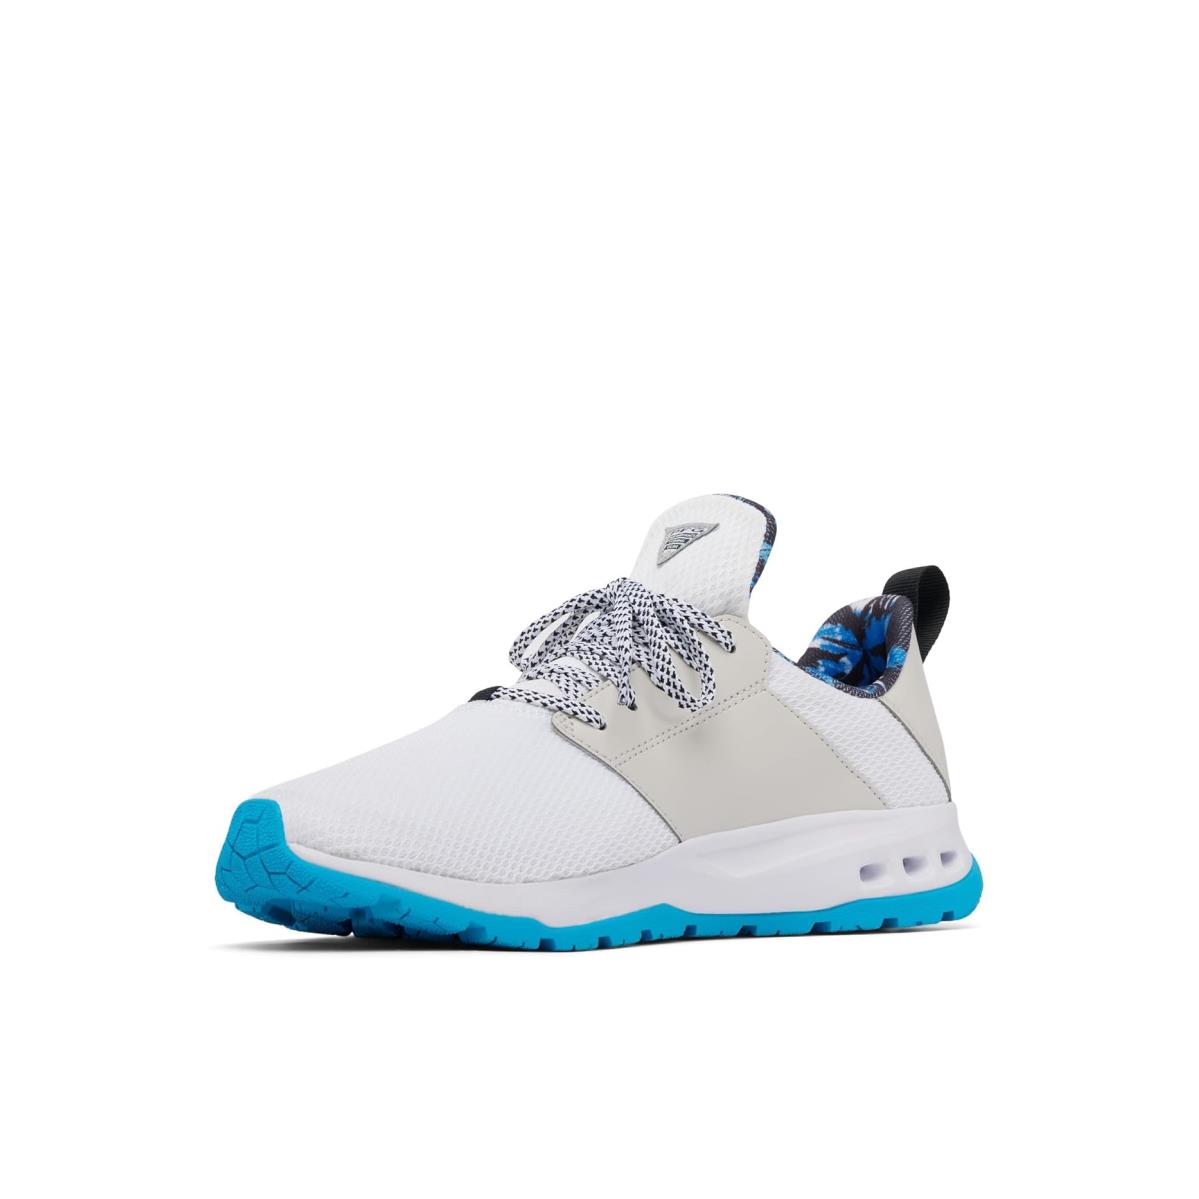 Man`s Sneakers Athletic Shoes Columbia Tamiami Pfg White/Ocean Blue